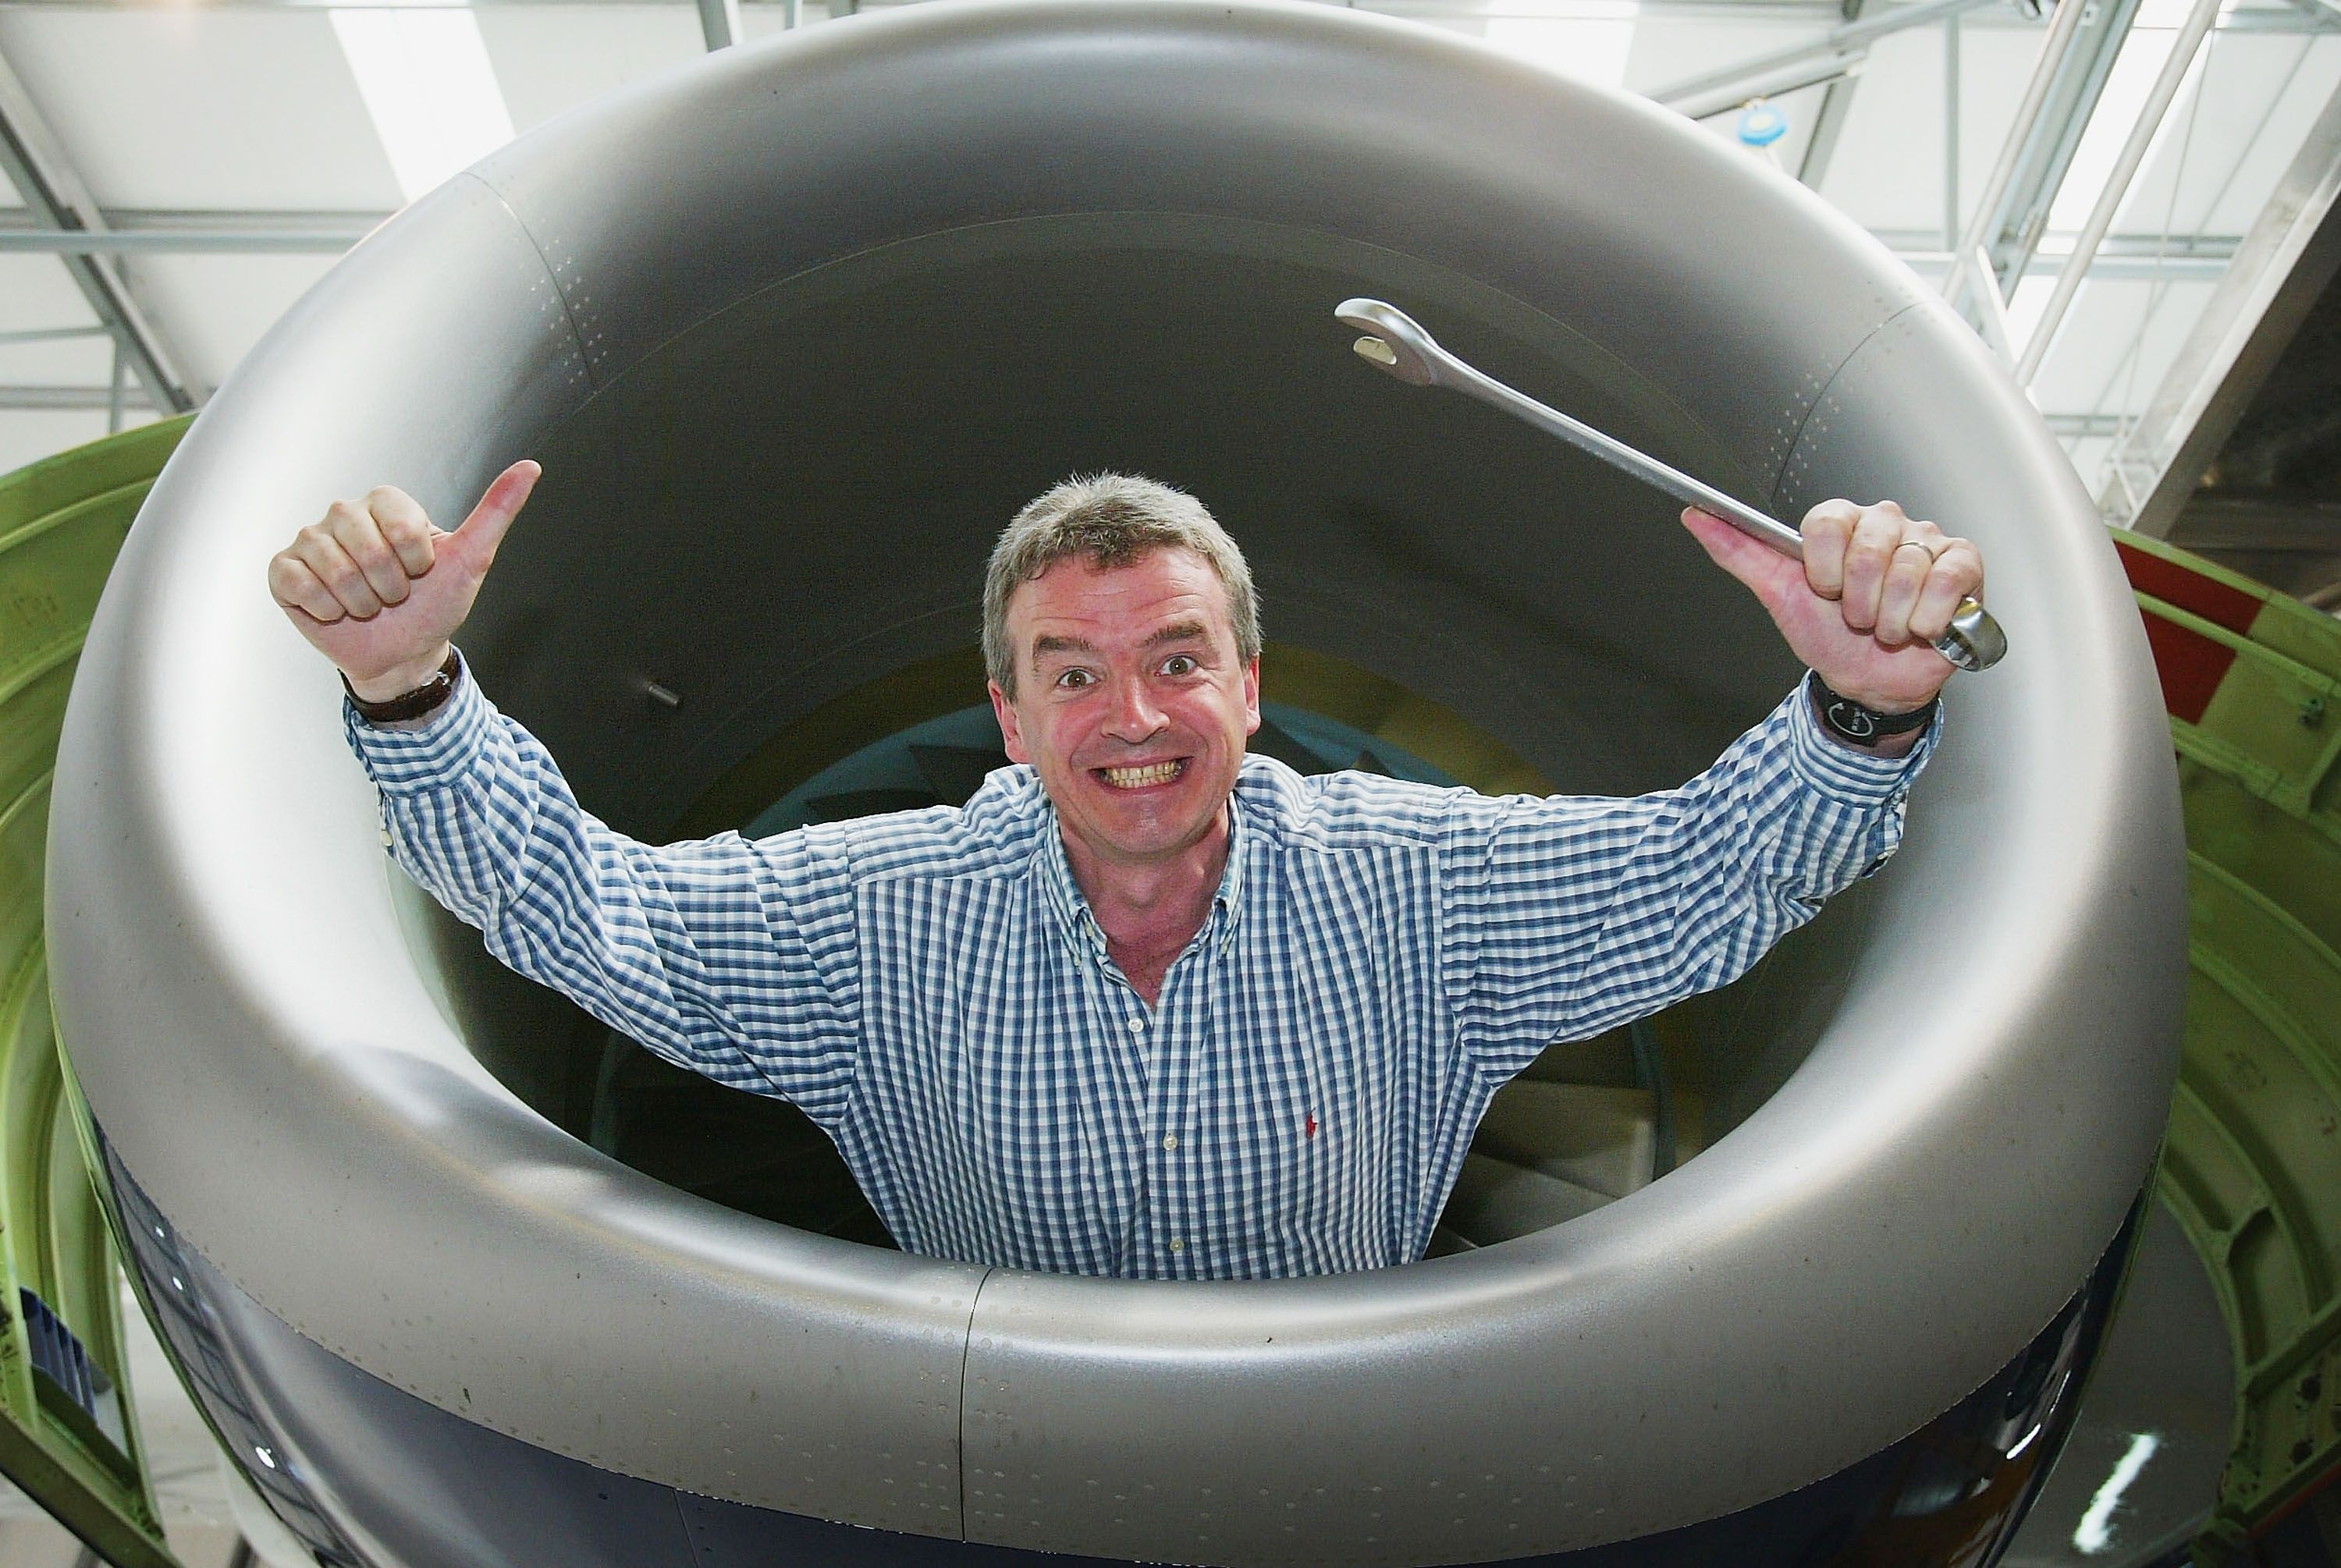 PRESTWICK, SCOTLAND - MAY 10: Michael O'Leary Chief Executive of low fare airline Ryanair poses for the camera during the opening of a new maintenance facility, on May 10, 2004 at Prestwick, Scotland. Low fares airline Ryanair officially opened the new ?10 million maintenace hanger at Prestwick Airport creating up to 200 new jobs for the area. (Photo by Christopher Furlong/Getty Images)